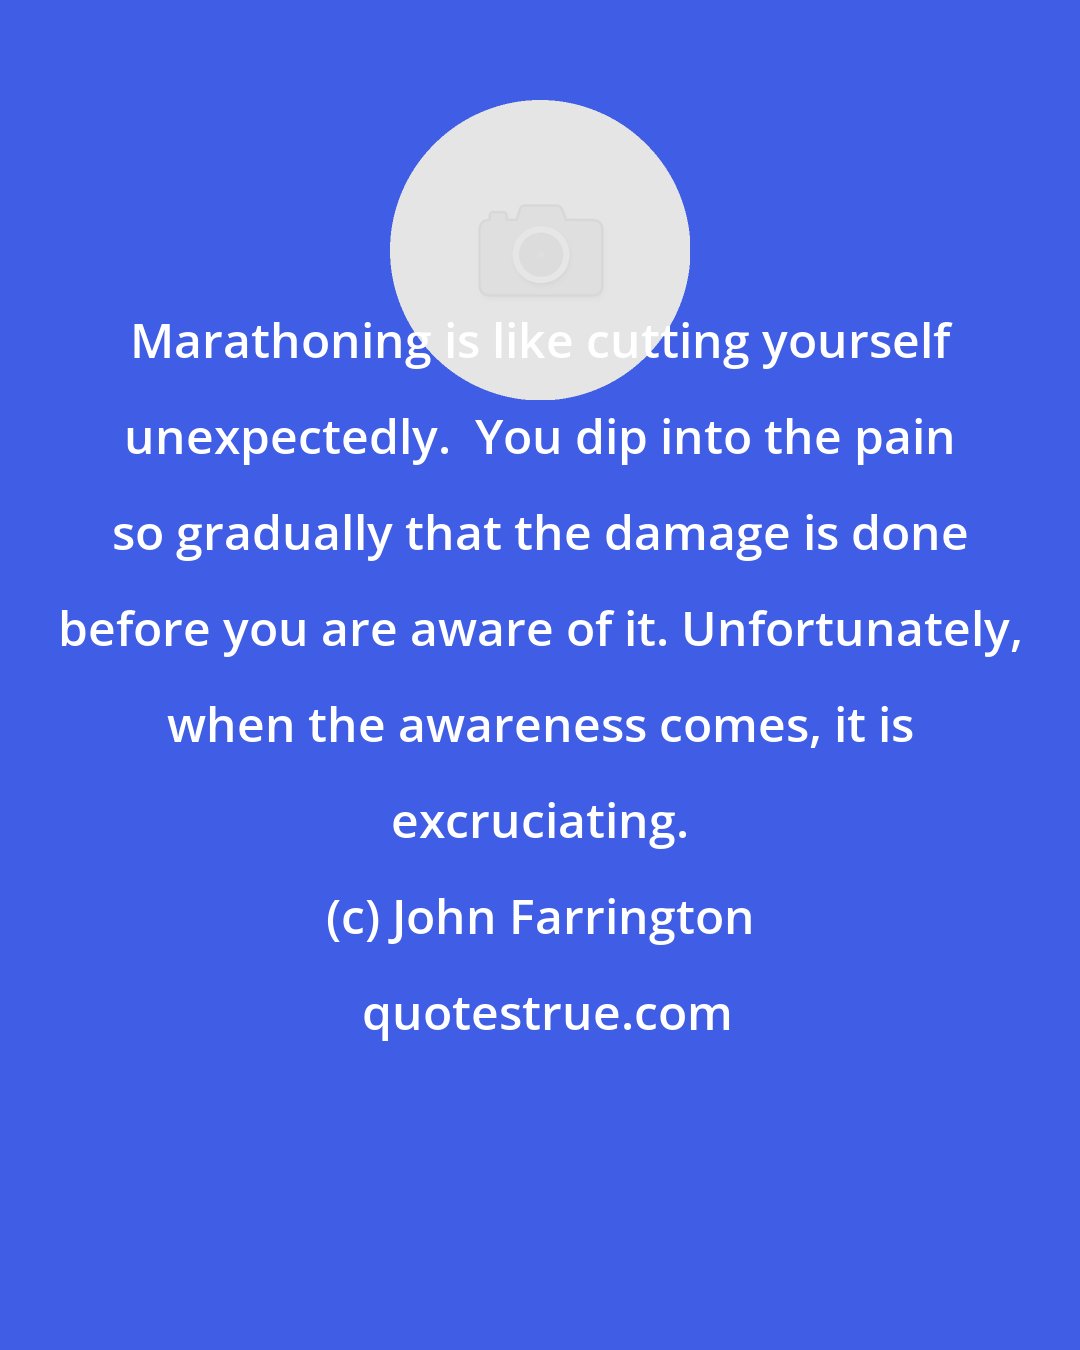 John Farrington: Marathoning is like cutting yourself unexpectedly.  You dip into the pain so gradually that the damage is done before you are aware of it. Unfortunately, when the awareness comes, it is excruciating.